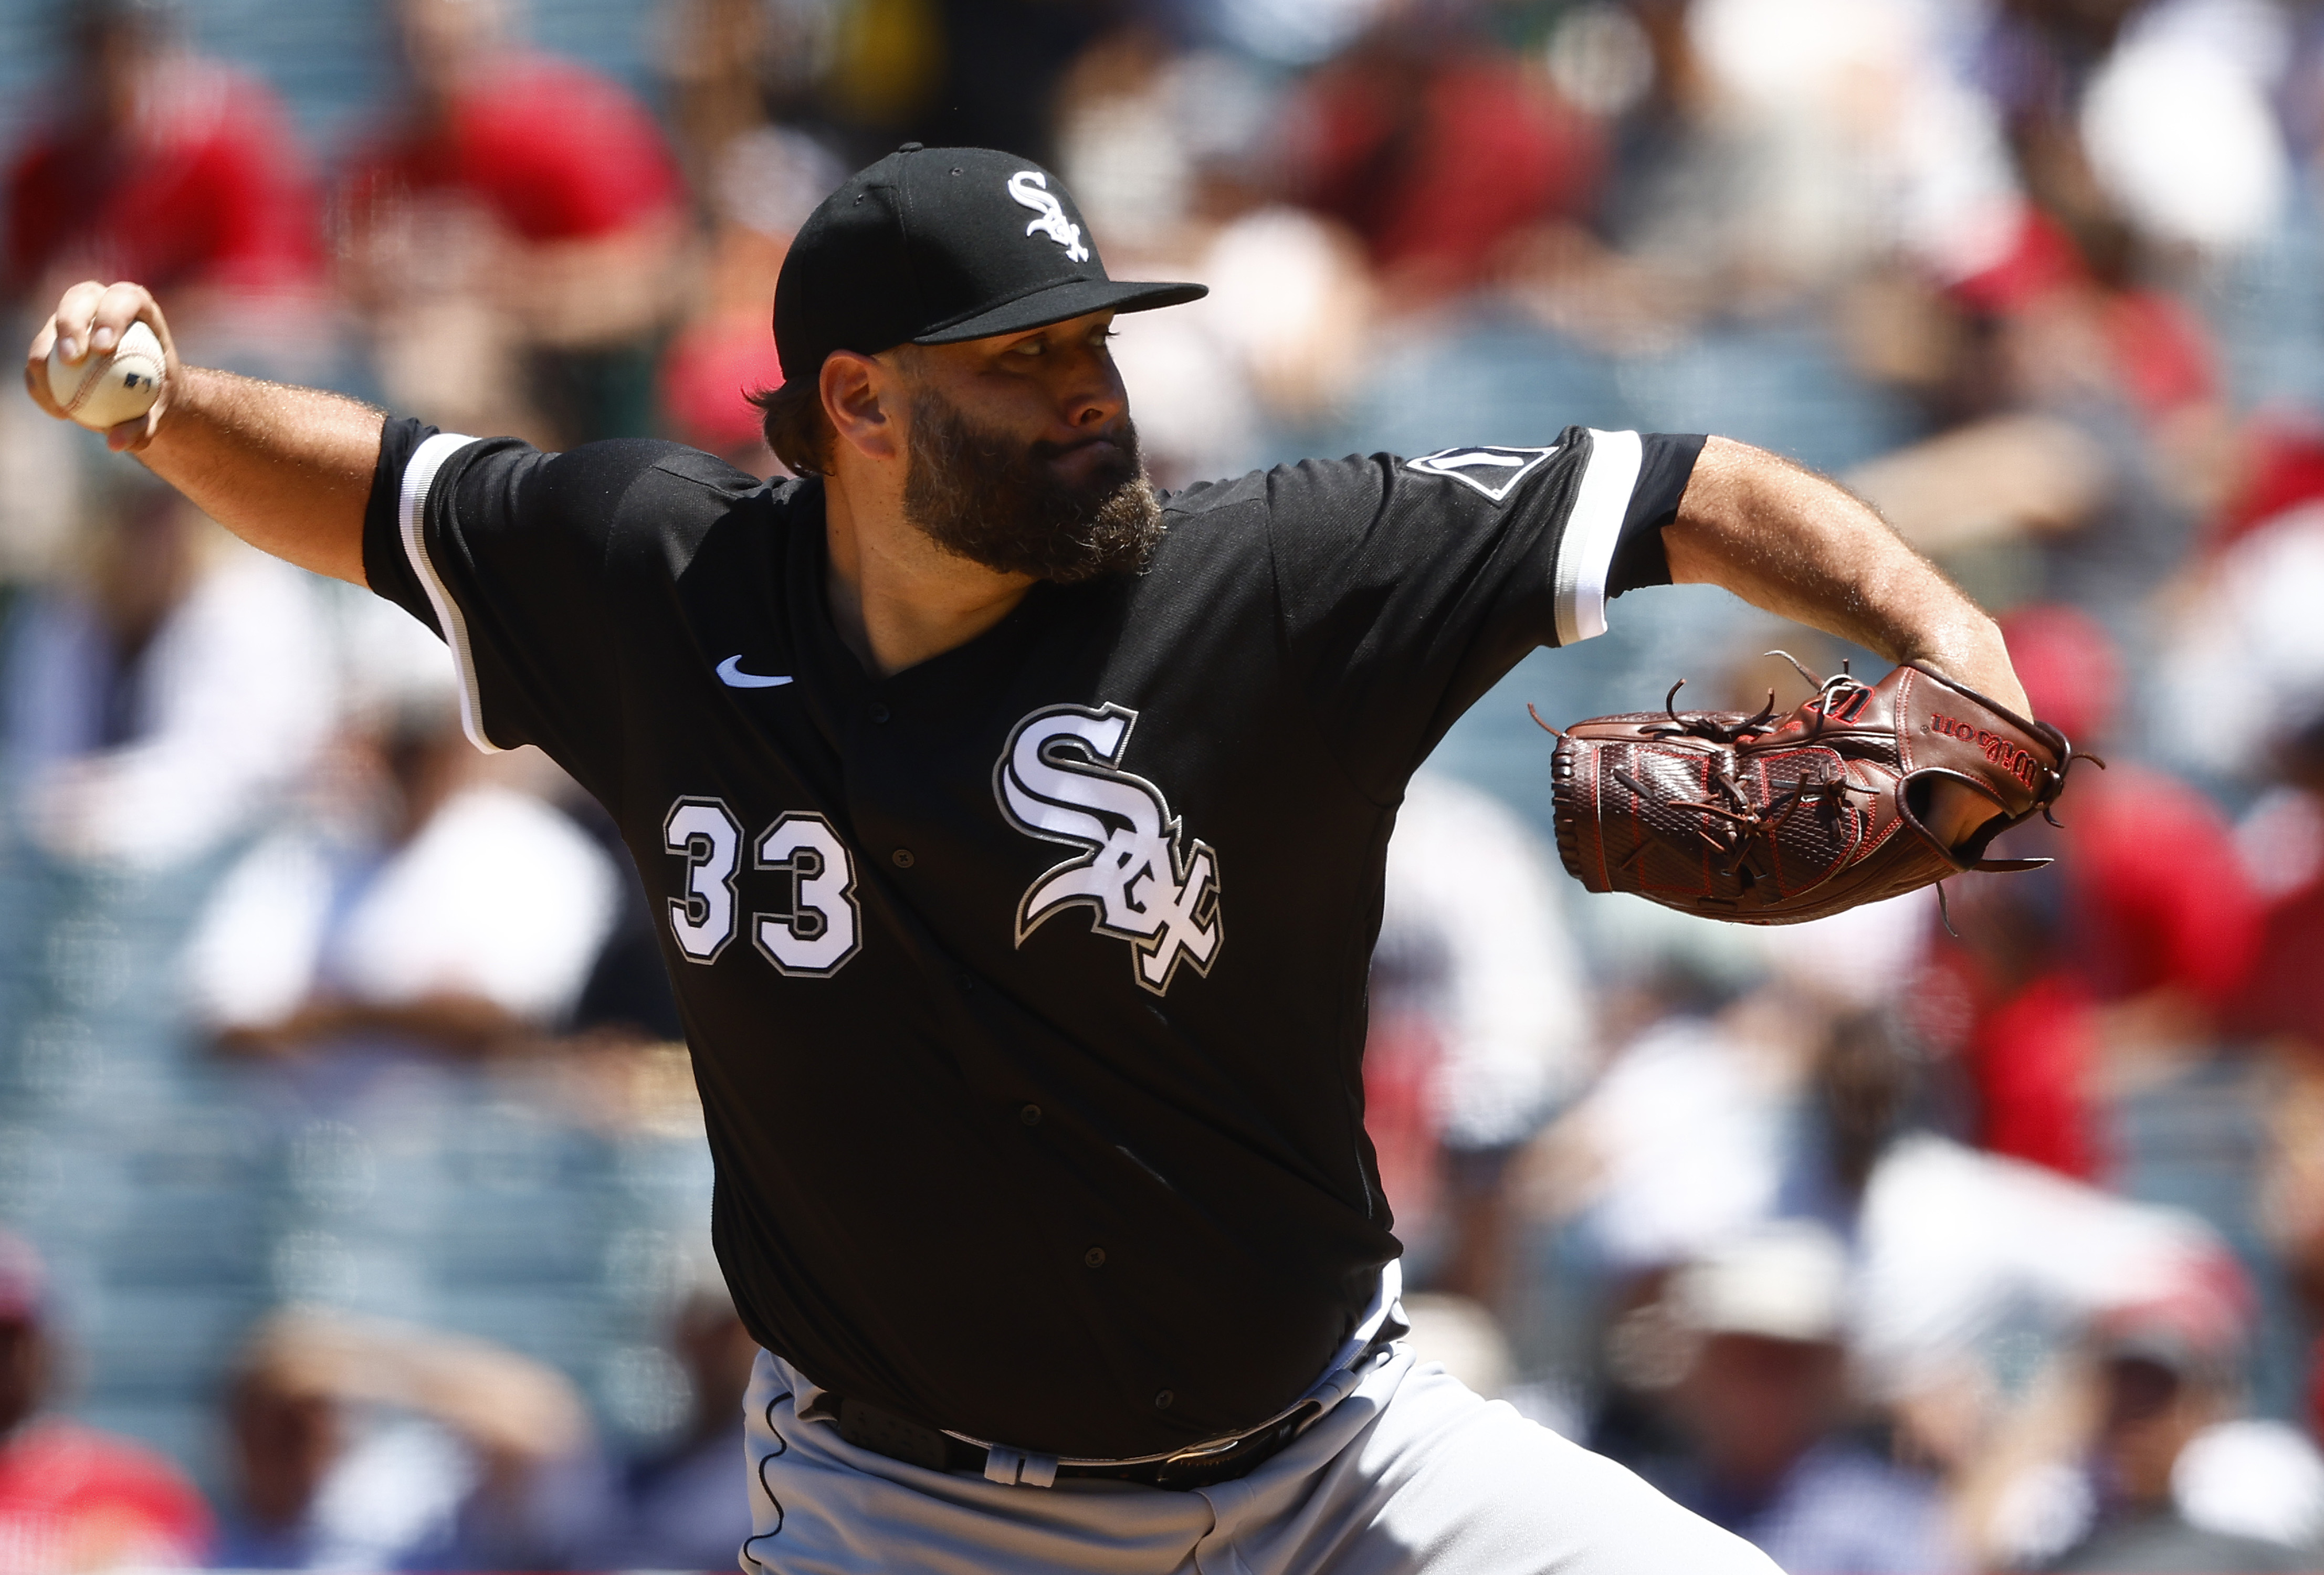 White Sox Rumors: These 10 teams could trade for Dylan Cease